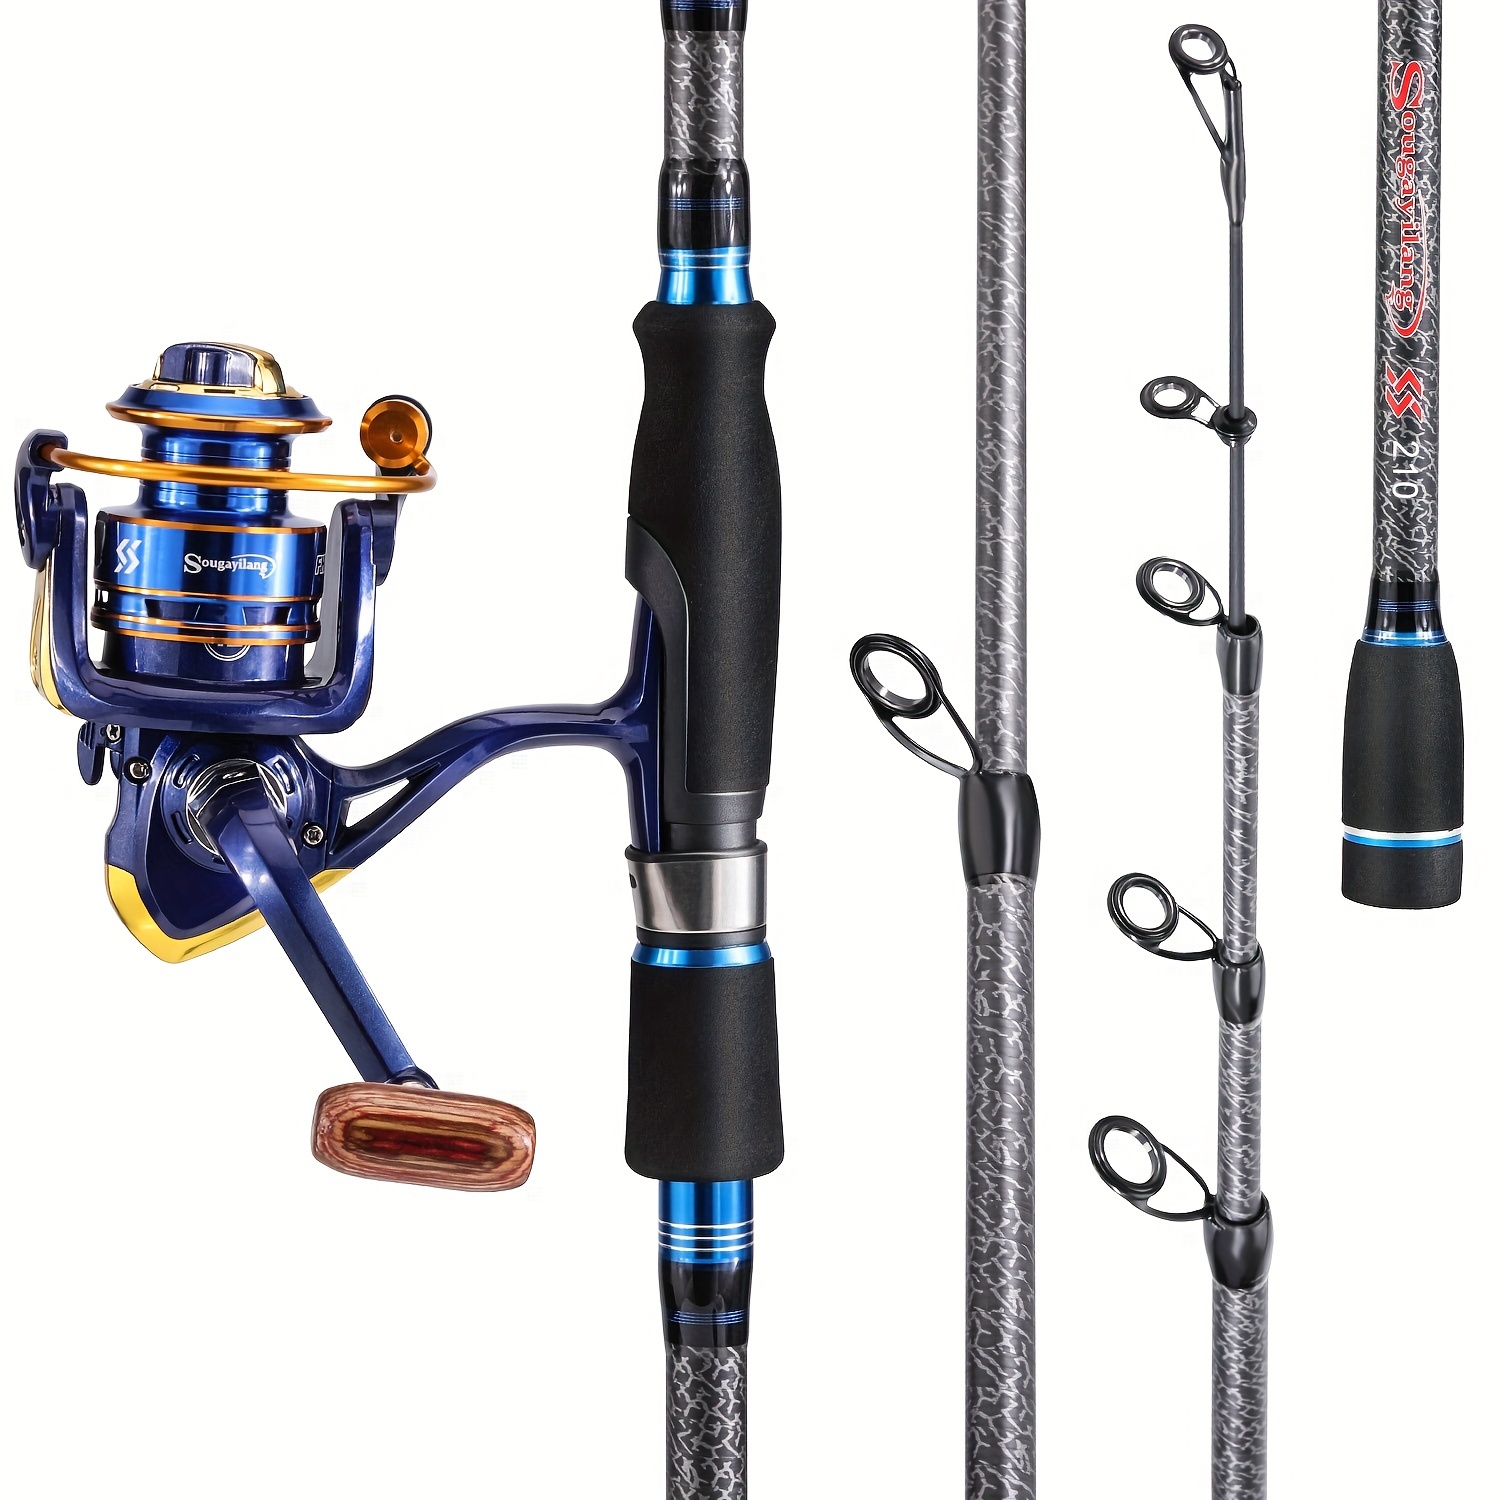 1set Spinning Reel + Fishing Equipped Fishing Sea Rod Fishing Tackle Combo  Full Kit + Fishing Line Set With Spoon Soft Lure Set